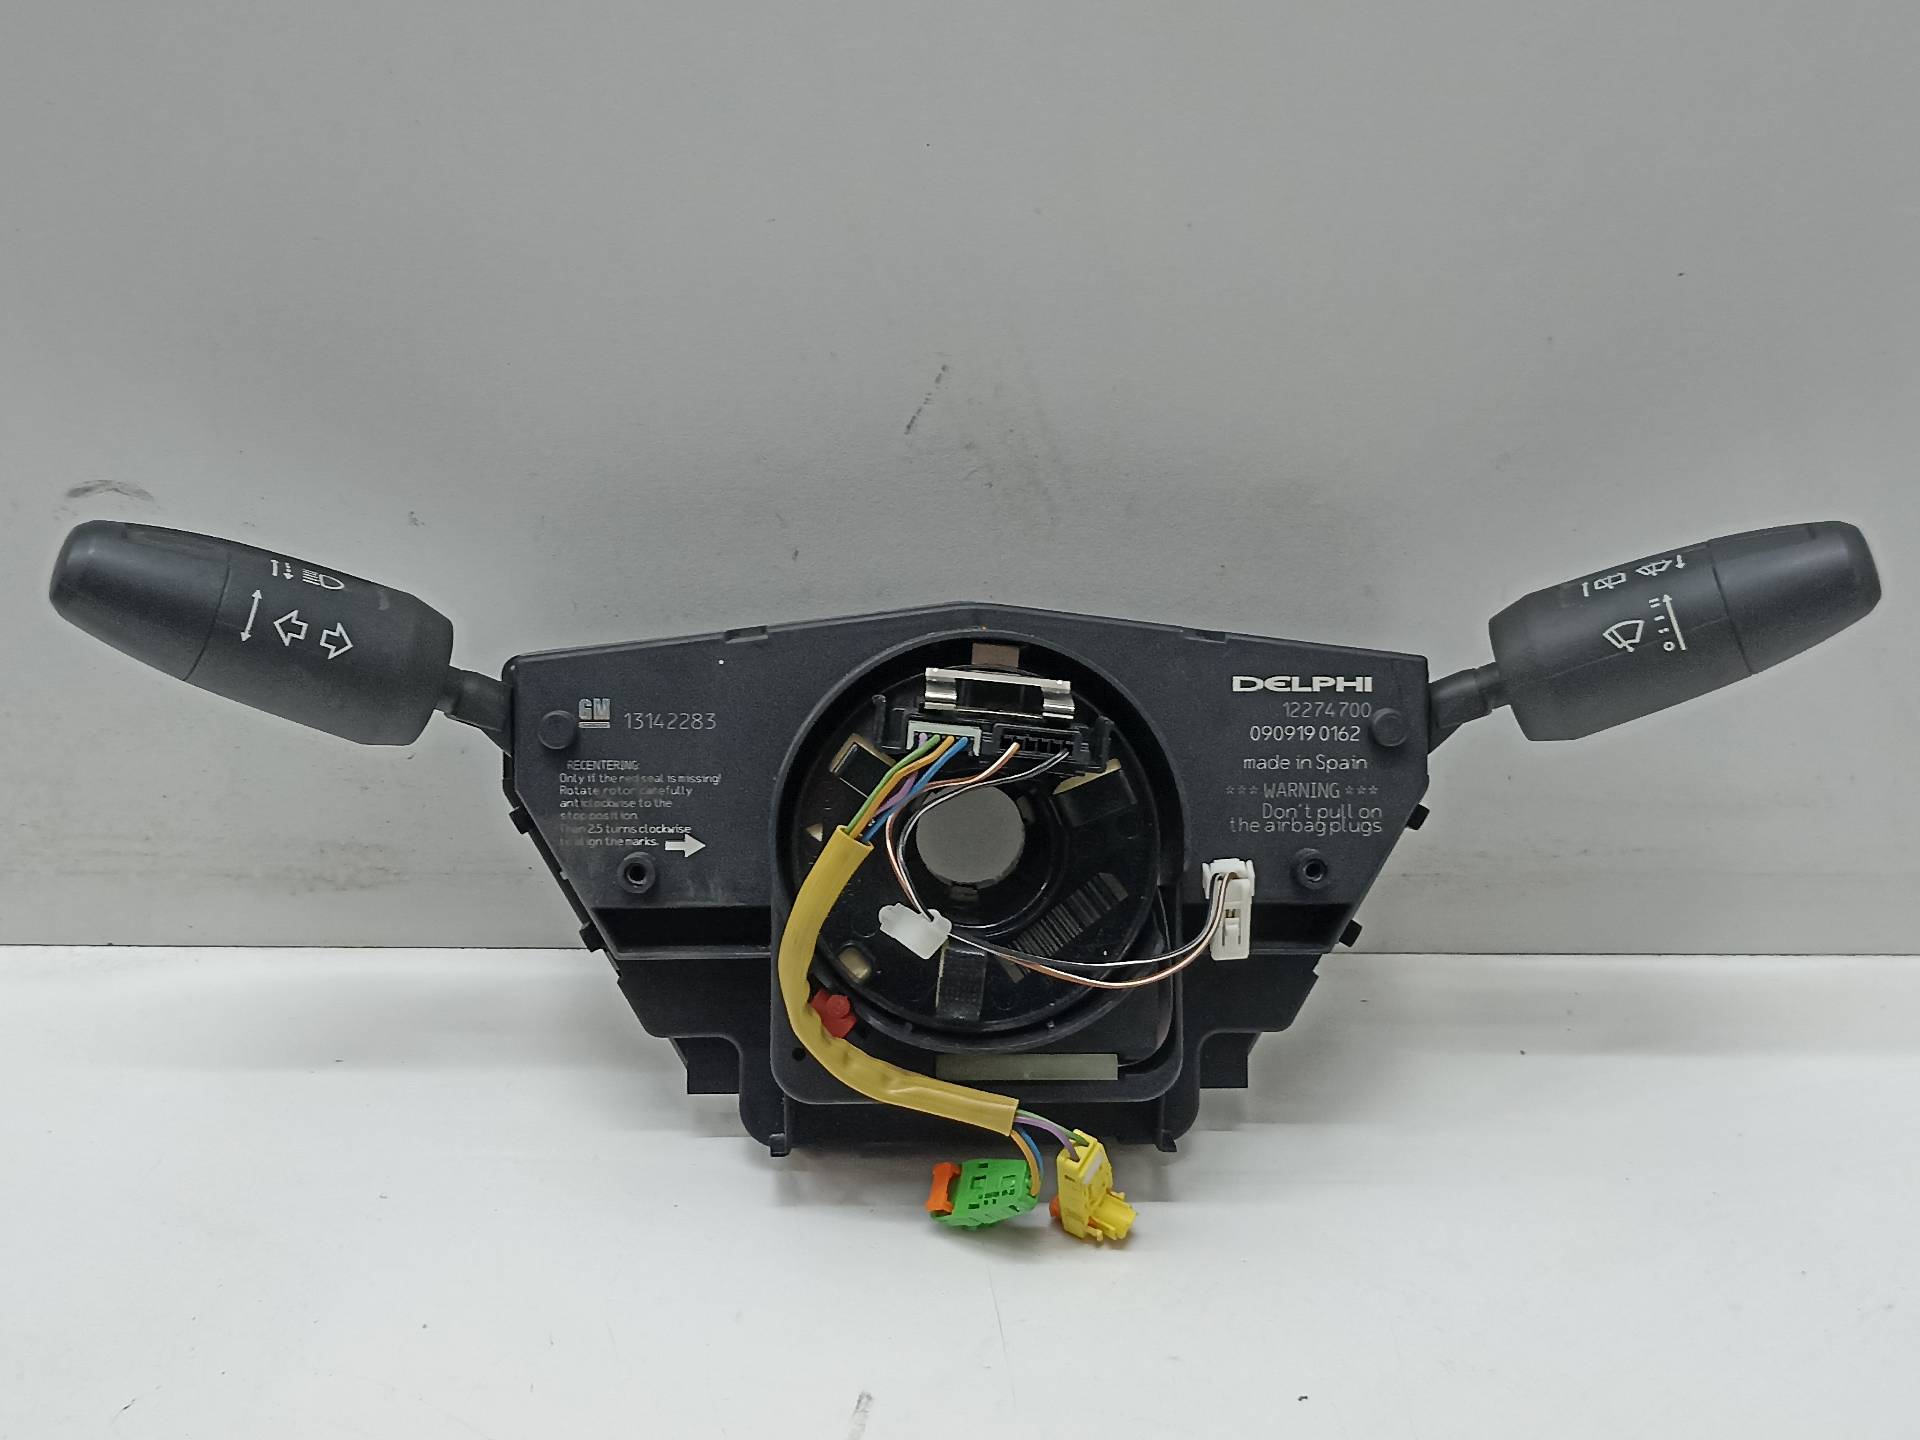 OPEL Corsa D (2006-2020) Switches 13142283, 329753452105, 105 24315452